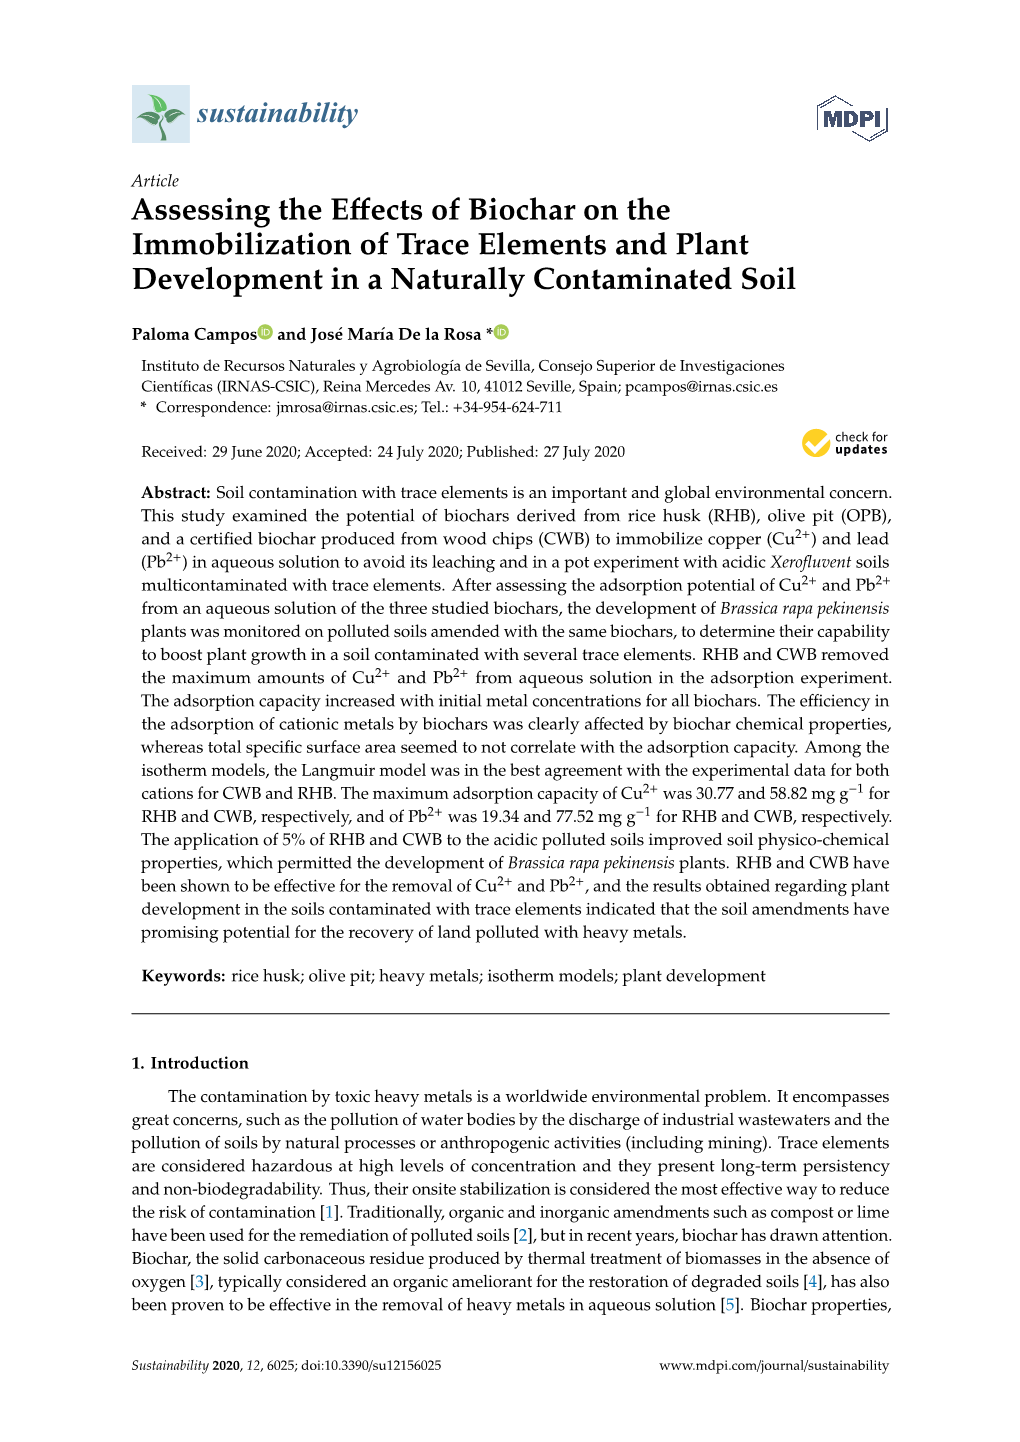 Assessing the Effects of Biochar on the Immobilization of Trace